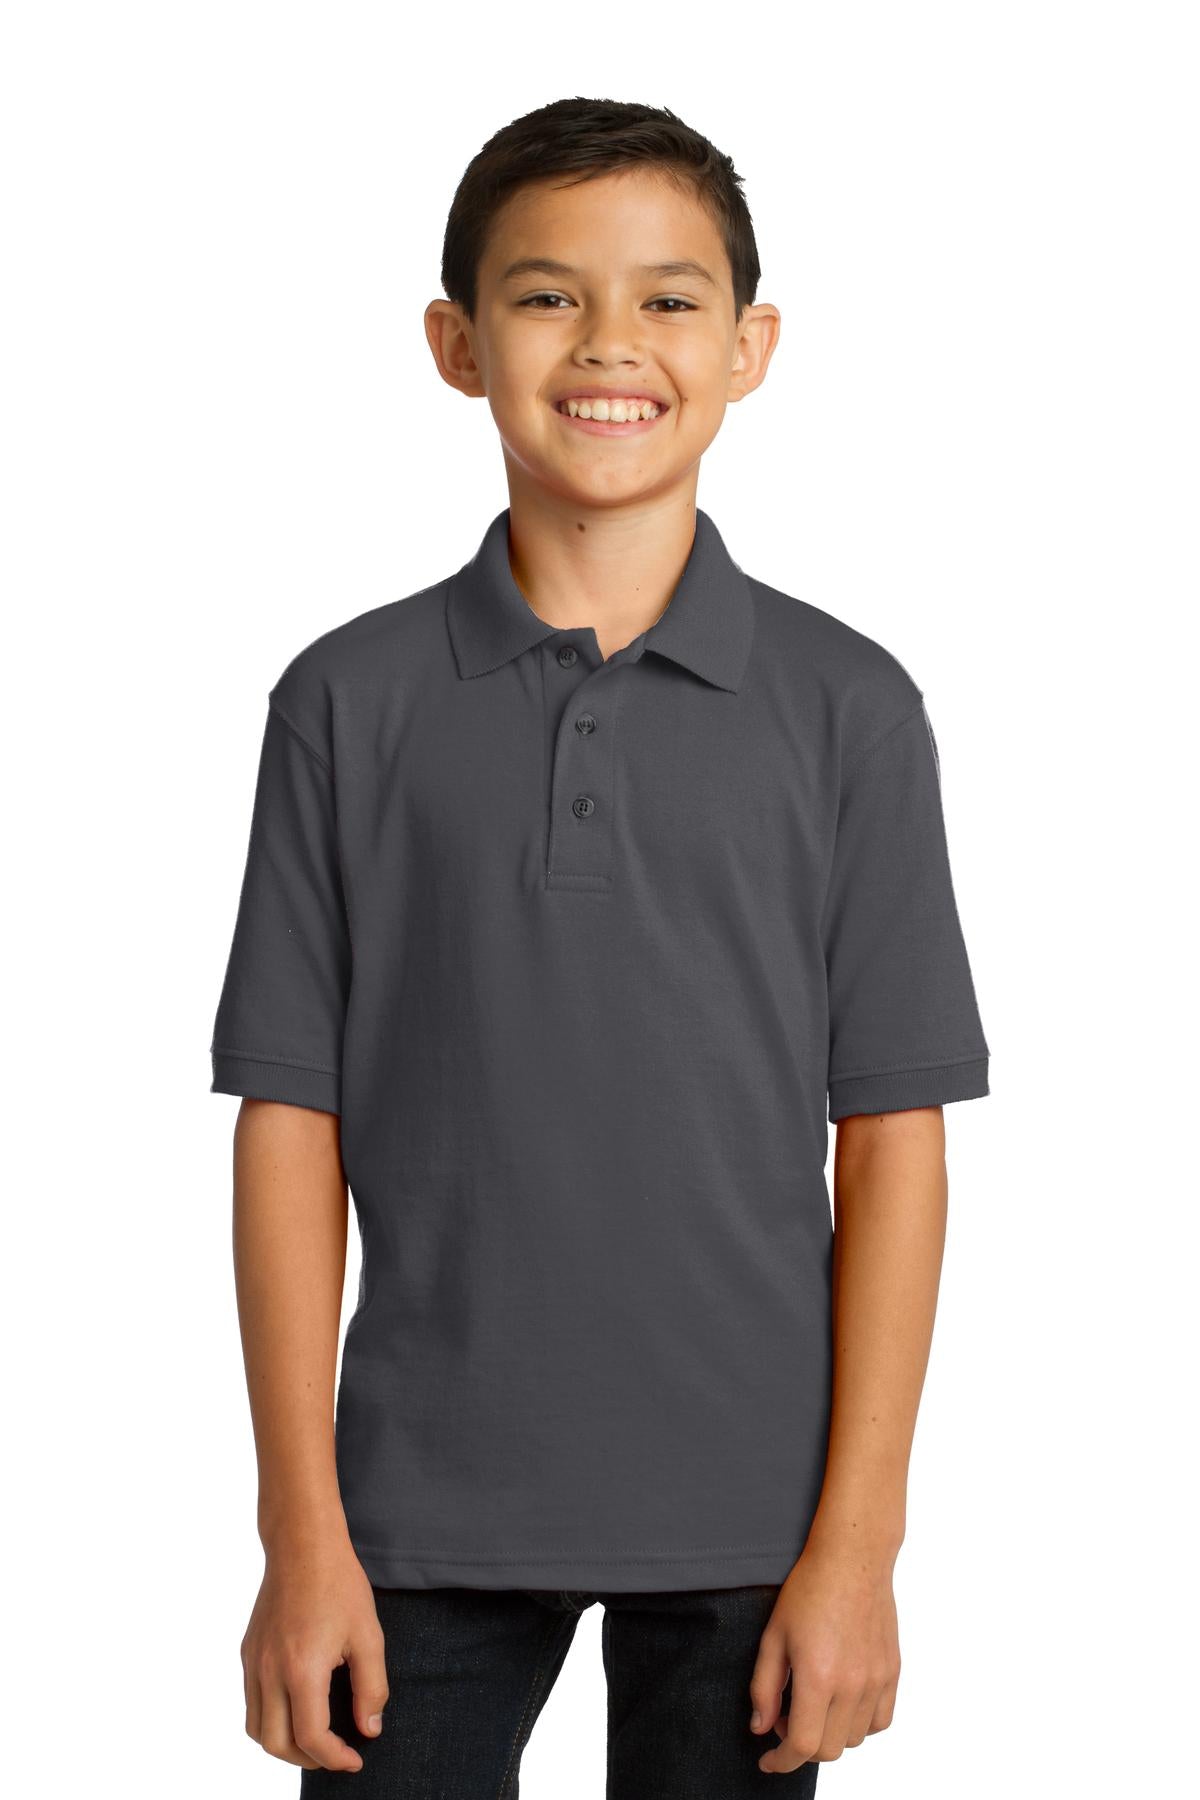 Port & Company® Youth Core Blend Jersey Knit Polo. KP55Y - DFW Impression